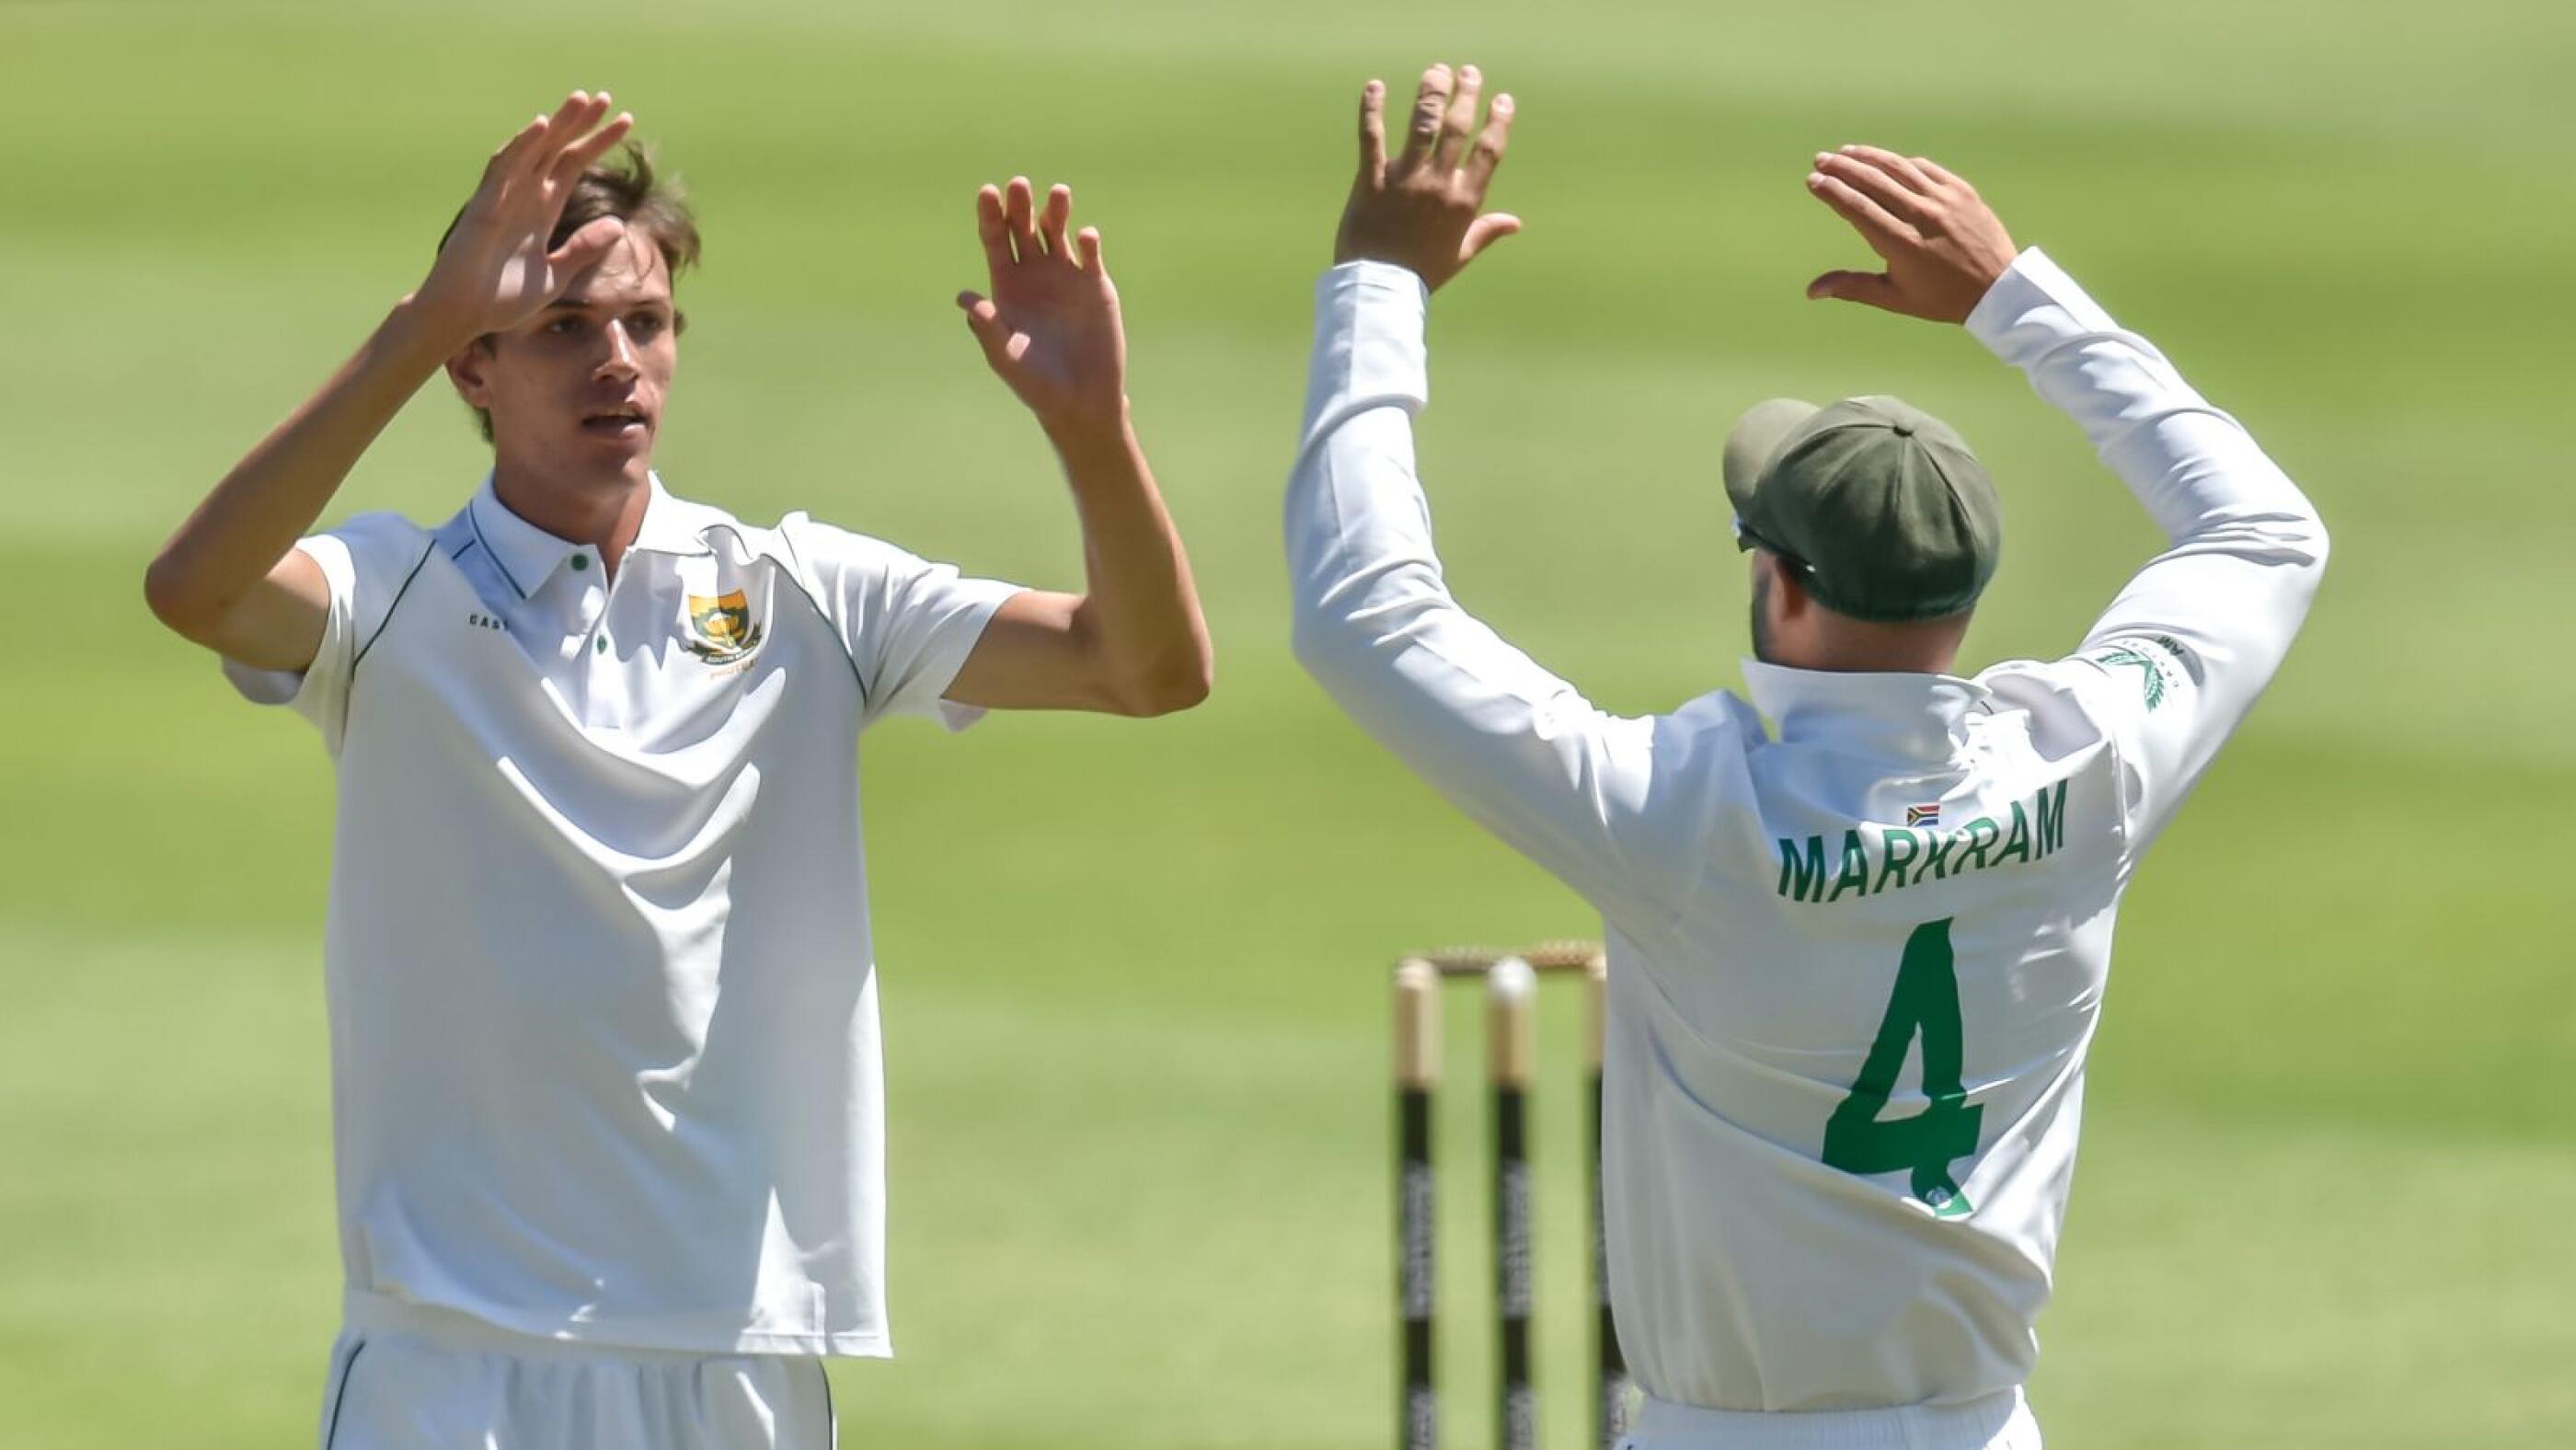 Marco Jansen of South Africa celebrates after getting the wicket of KL Rahul of India during day 1 of the 2nd Test match at the Wanderers in Johannesburg on Monday